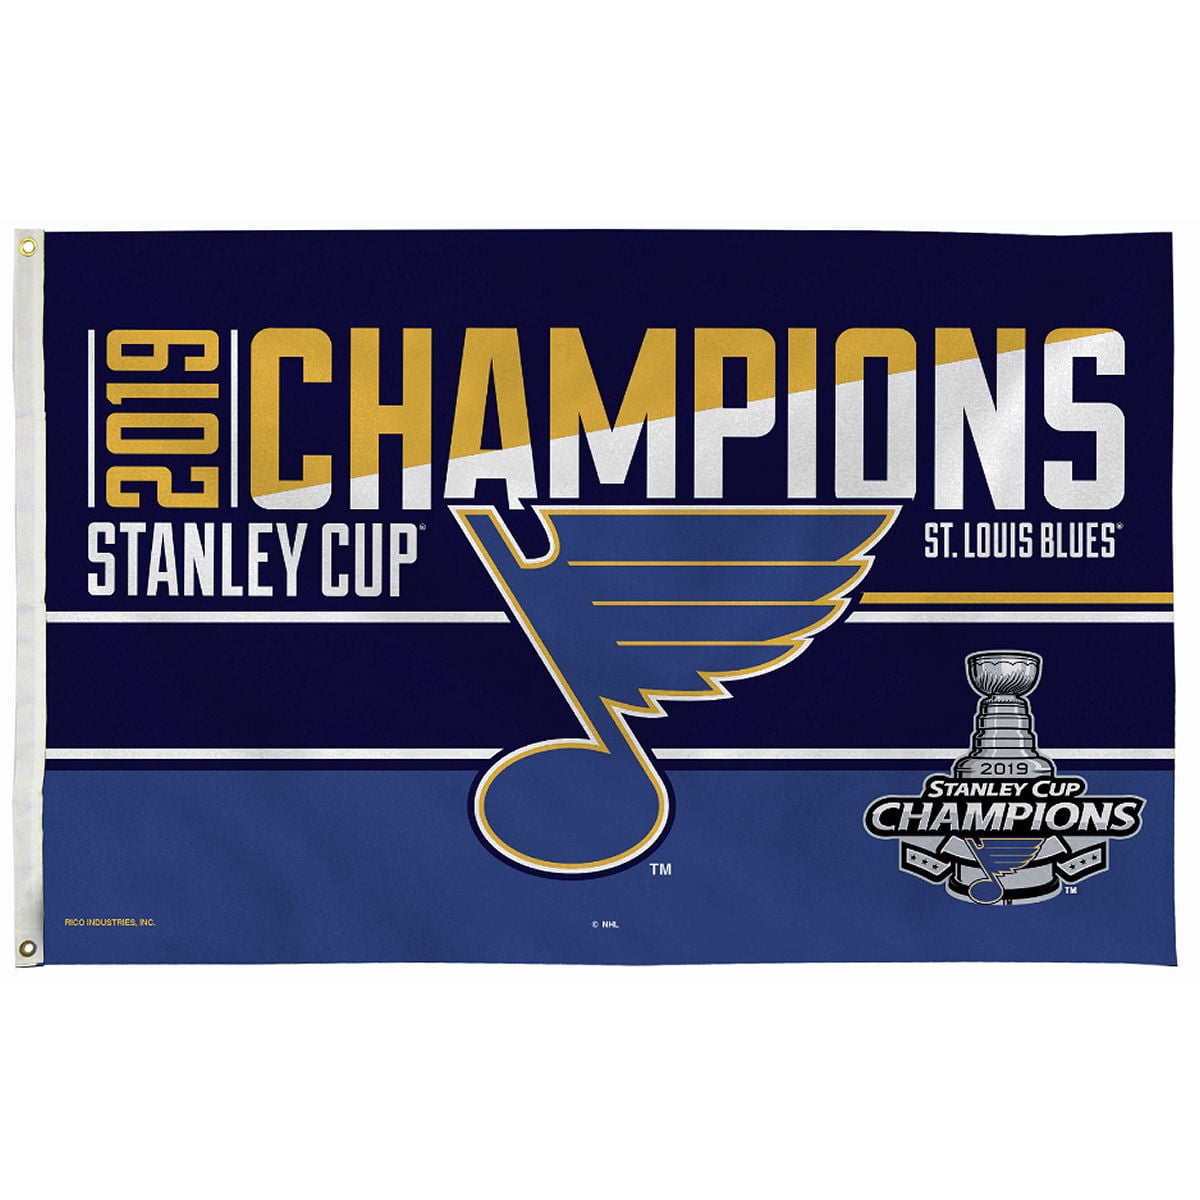 St. Louis Blues 2019 Stanley Cup Champions Double Sided Garden Flag